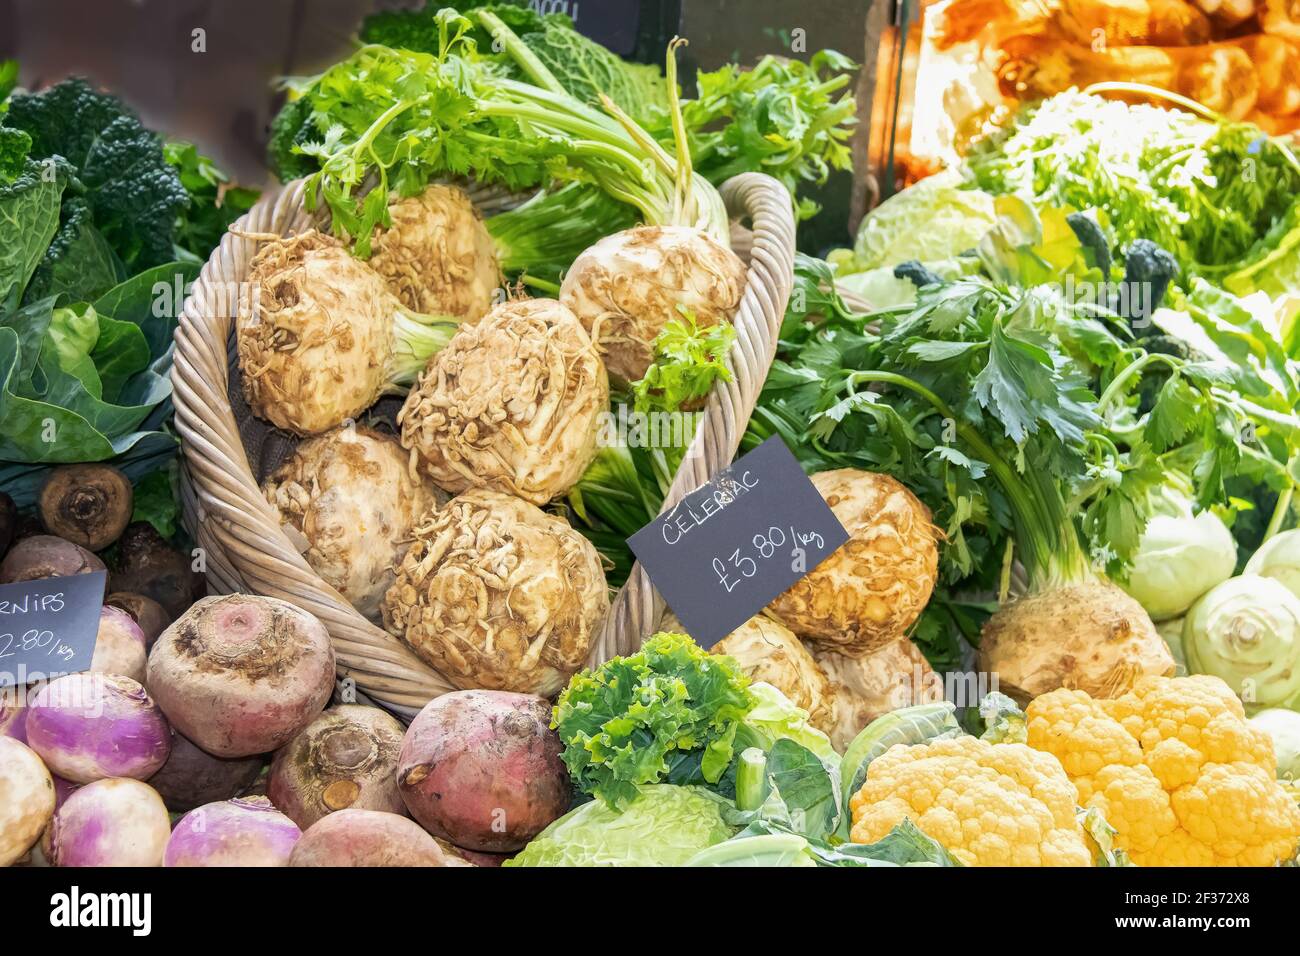 Basket and pile of vegetables at UK market including turnips and kale and celeriac and cauliflower Stock Photo